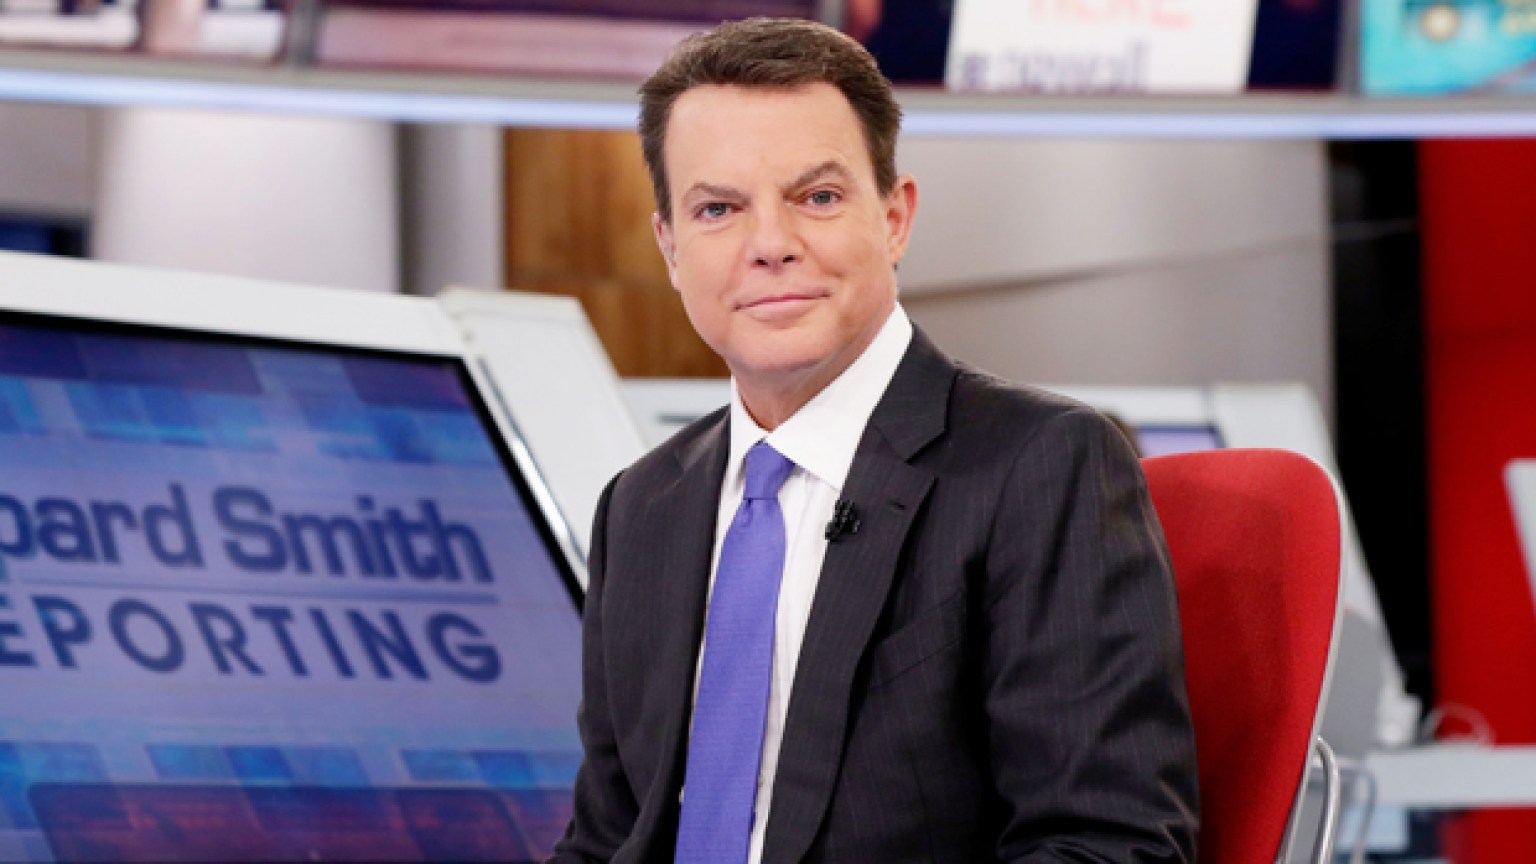 Who Is Shepard Smith? 5 Things To Know About Former Fox News Anchor